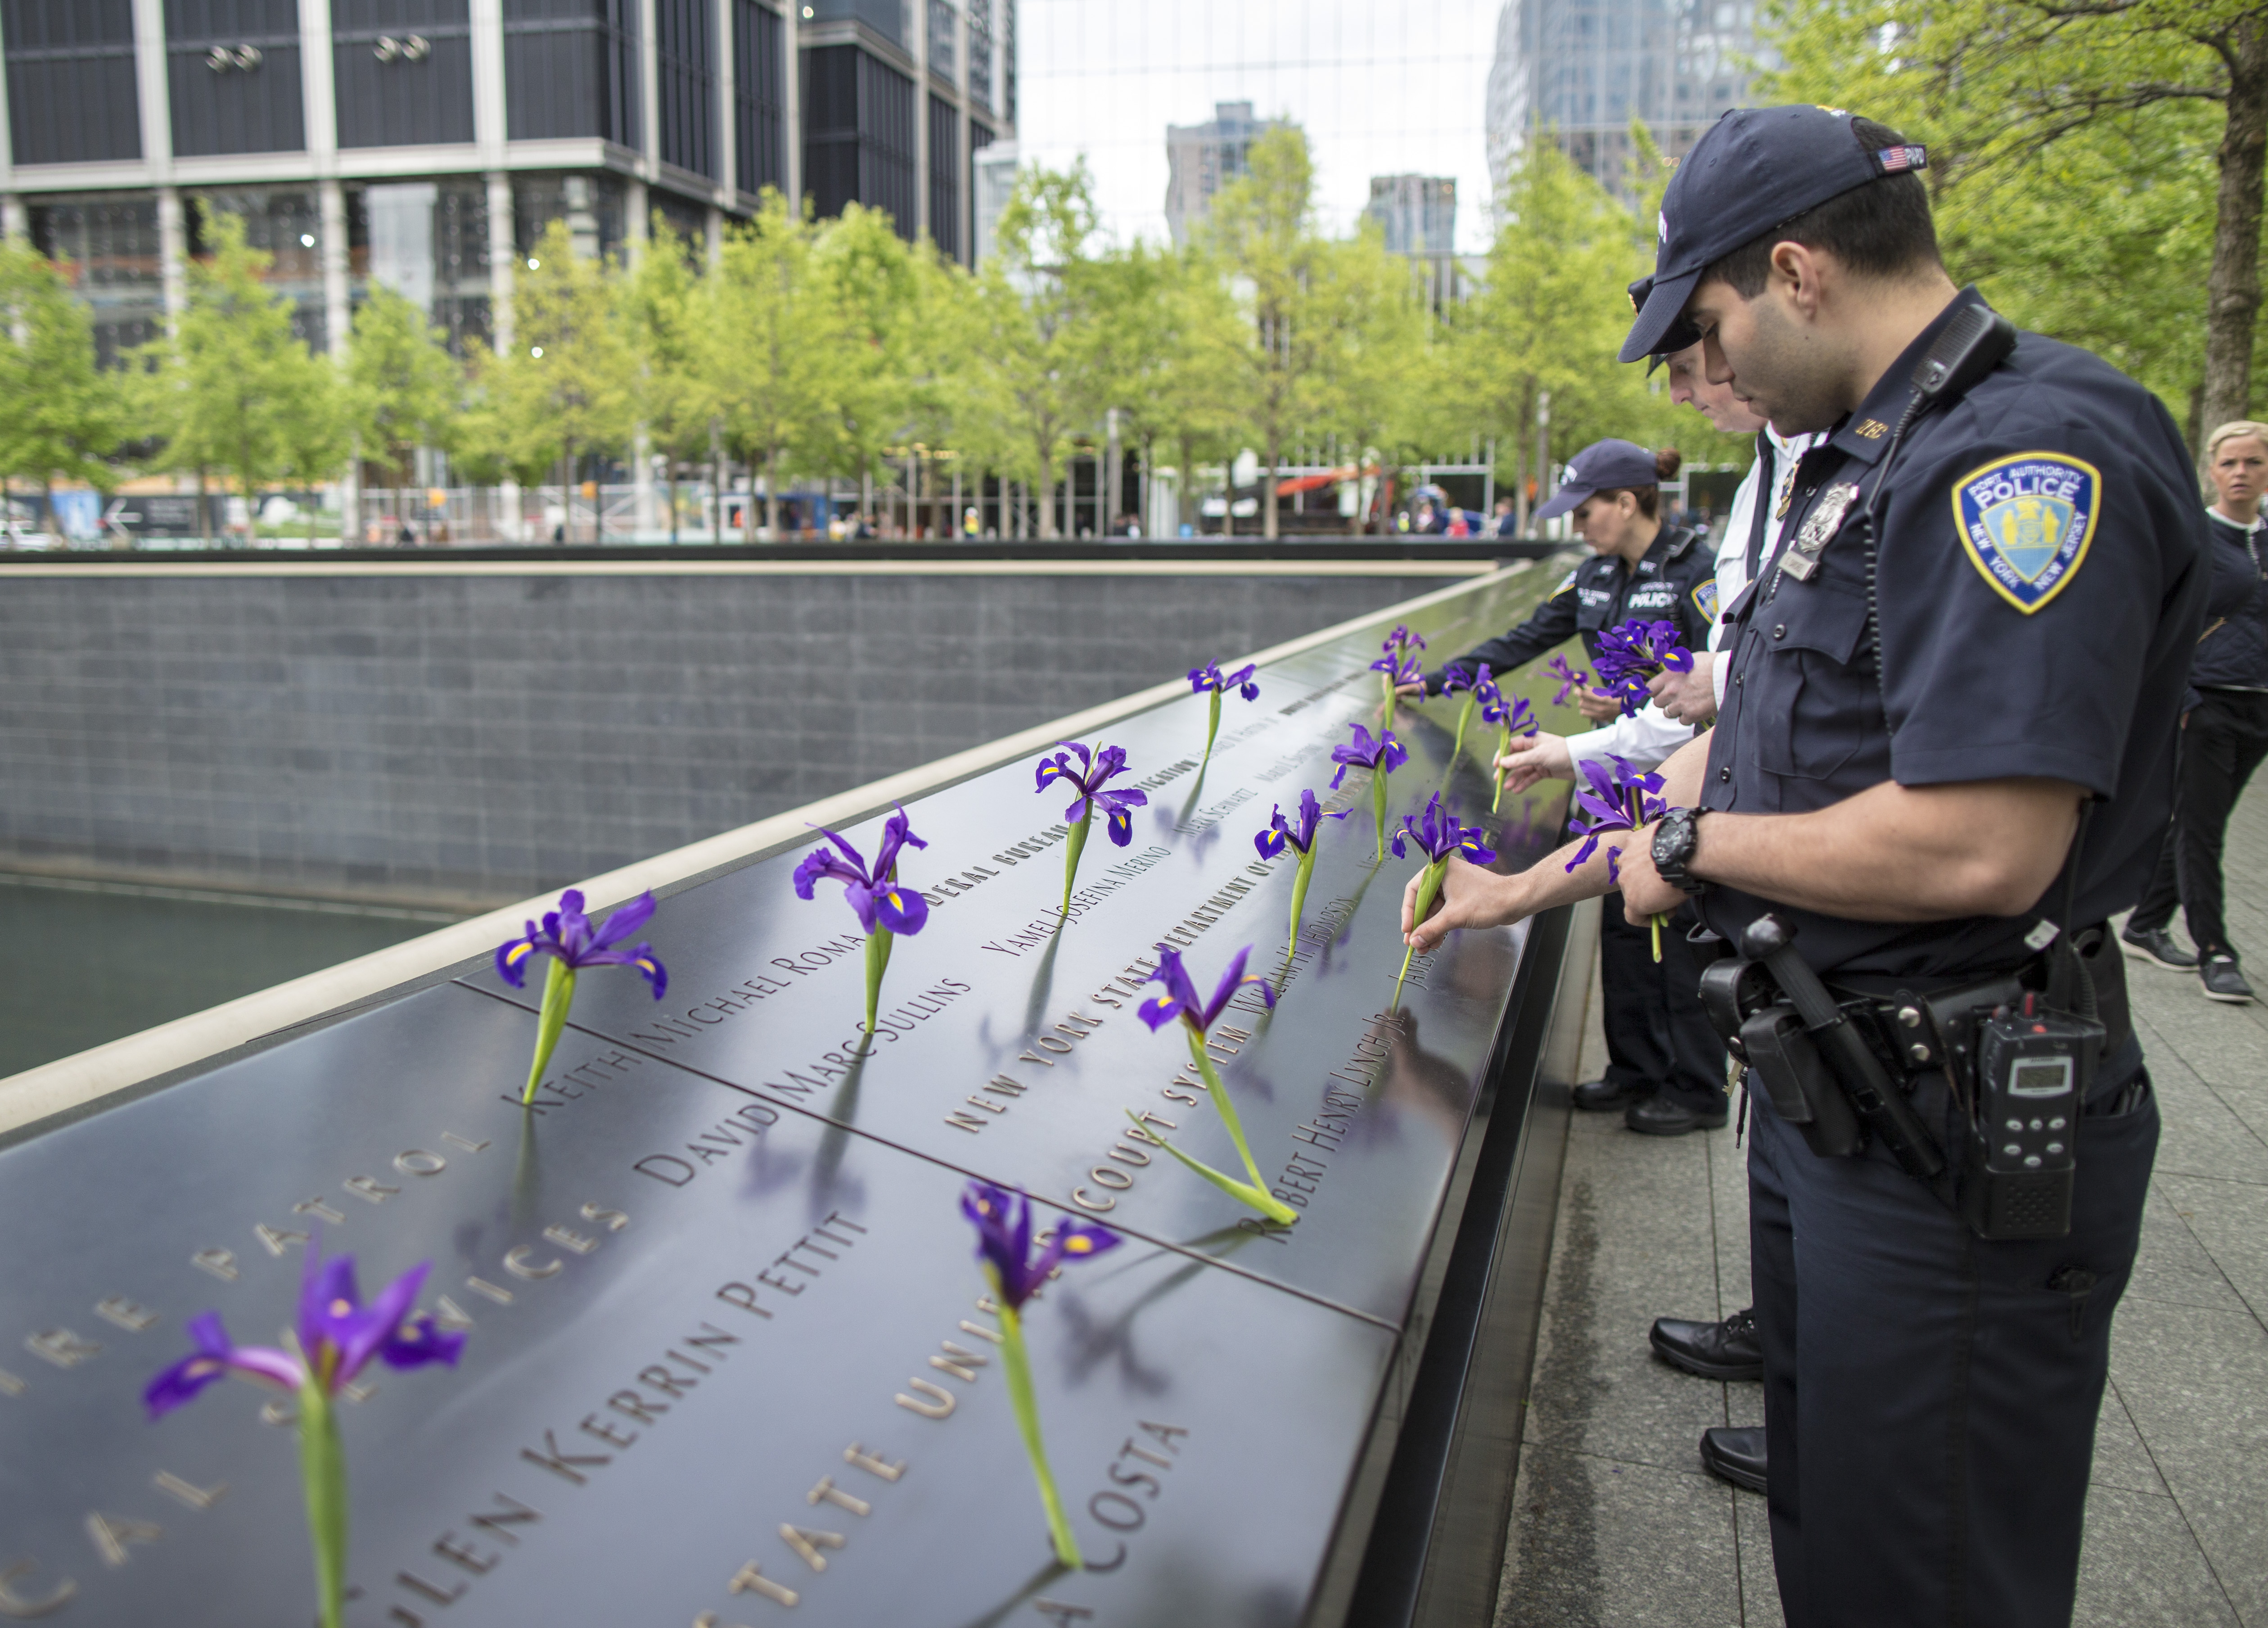 Two uniformed members of the PAPD place purple flowers on a bronze parapet at the Memorial.